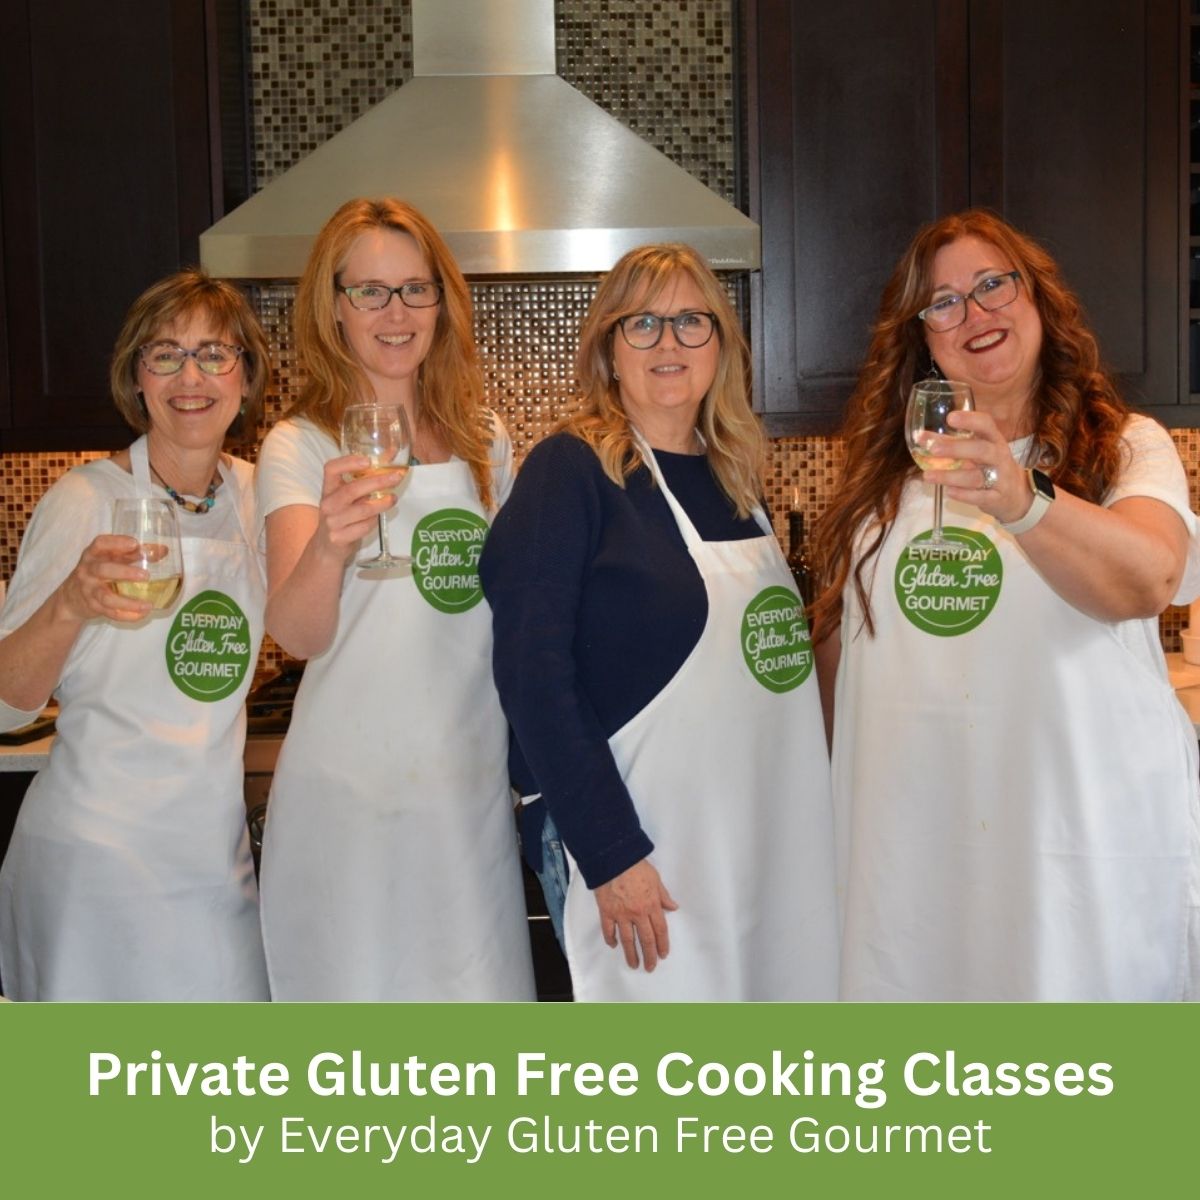 4 ladies wearing aprons in the Everyday Gluten Free Gourmet kitchen raising a glass of wine.